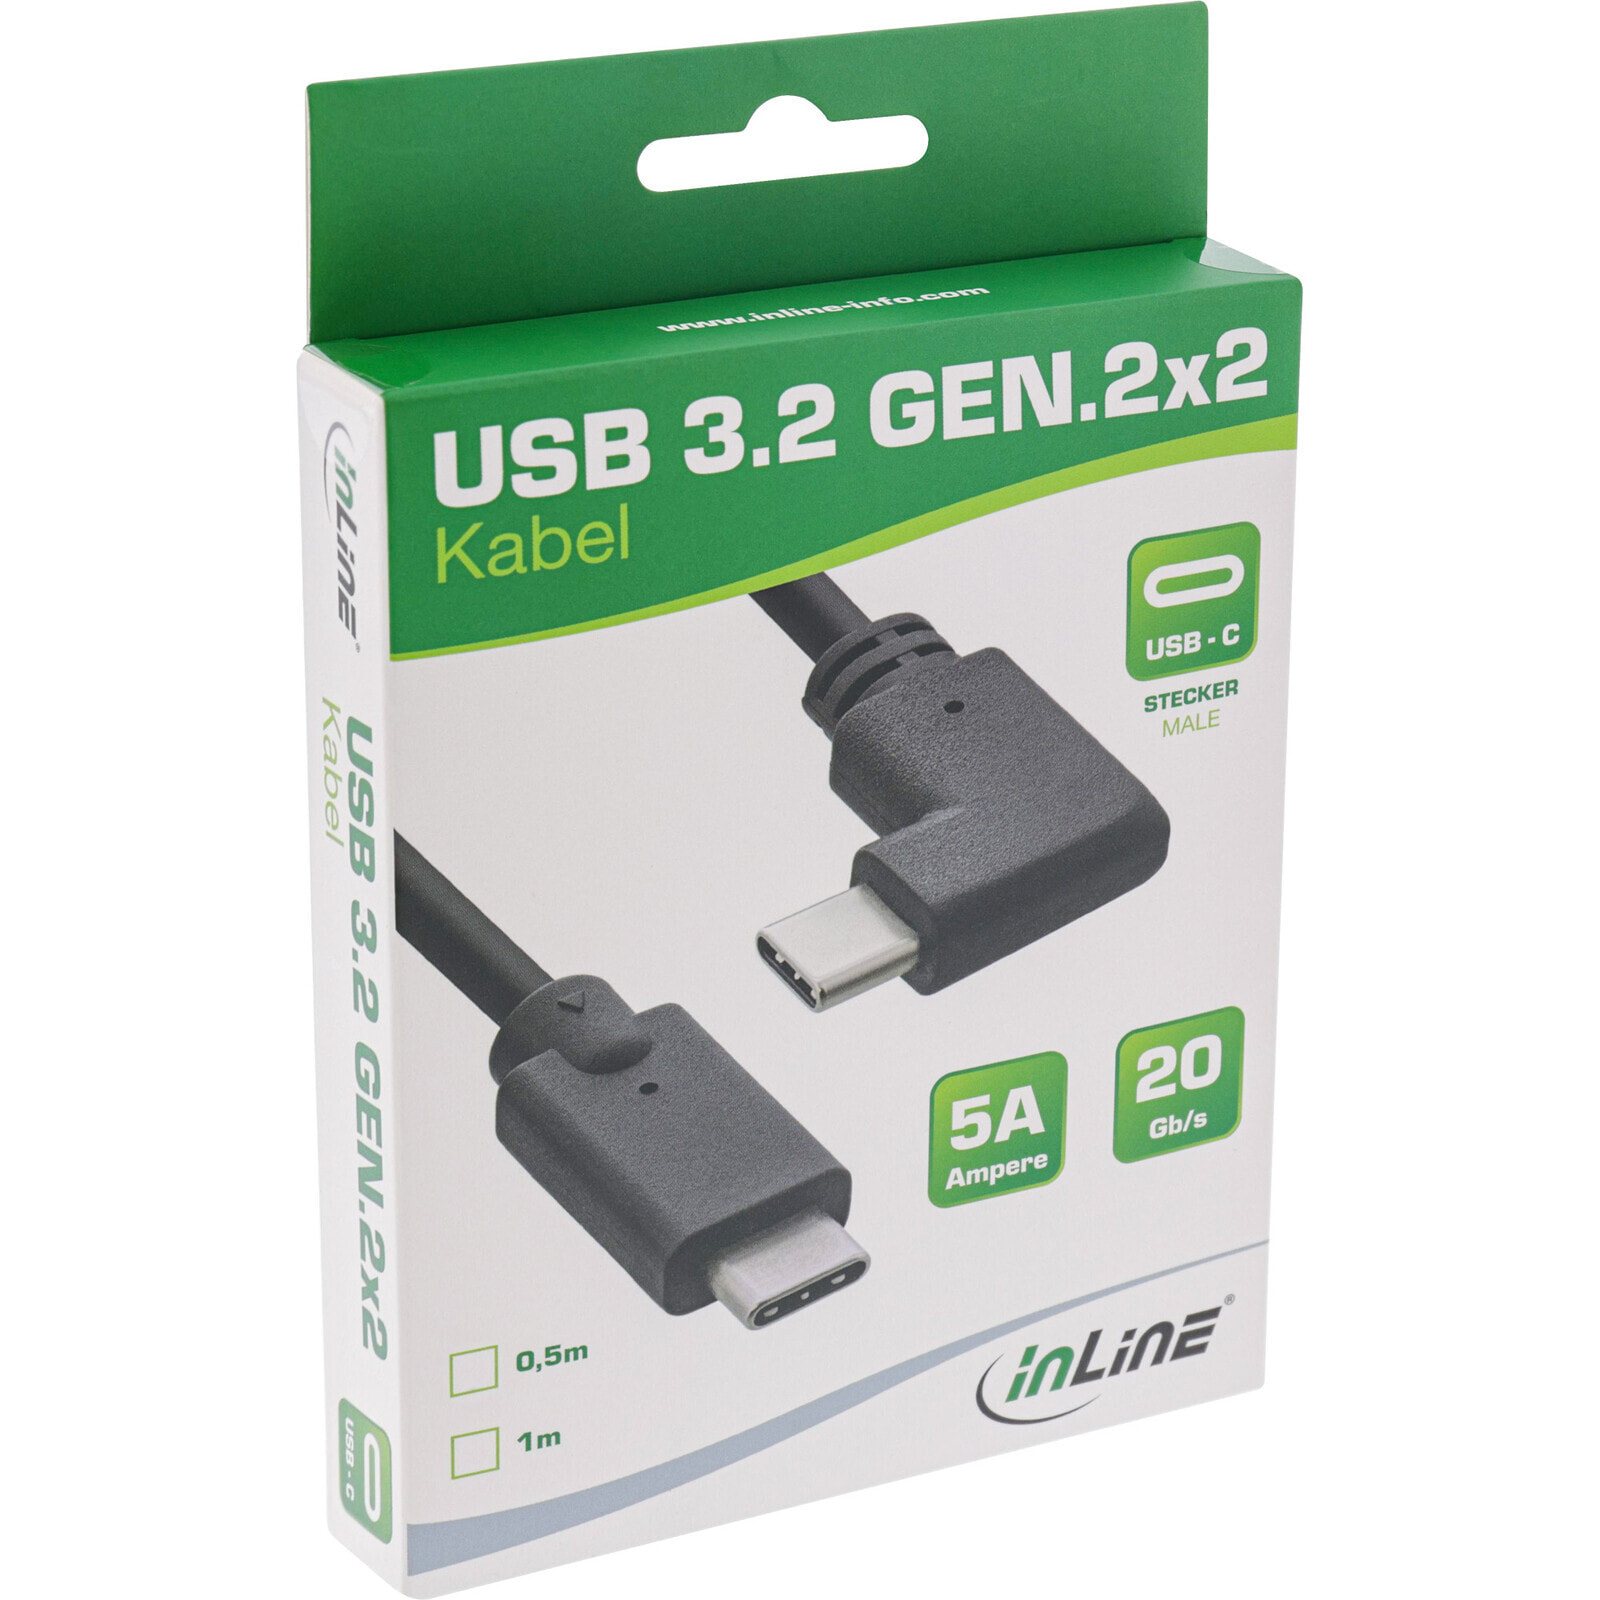 USB 3.2 Gen.2 cable - USB-C male/male angled - black - 1m